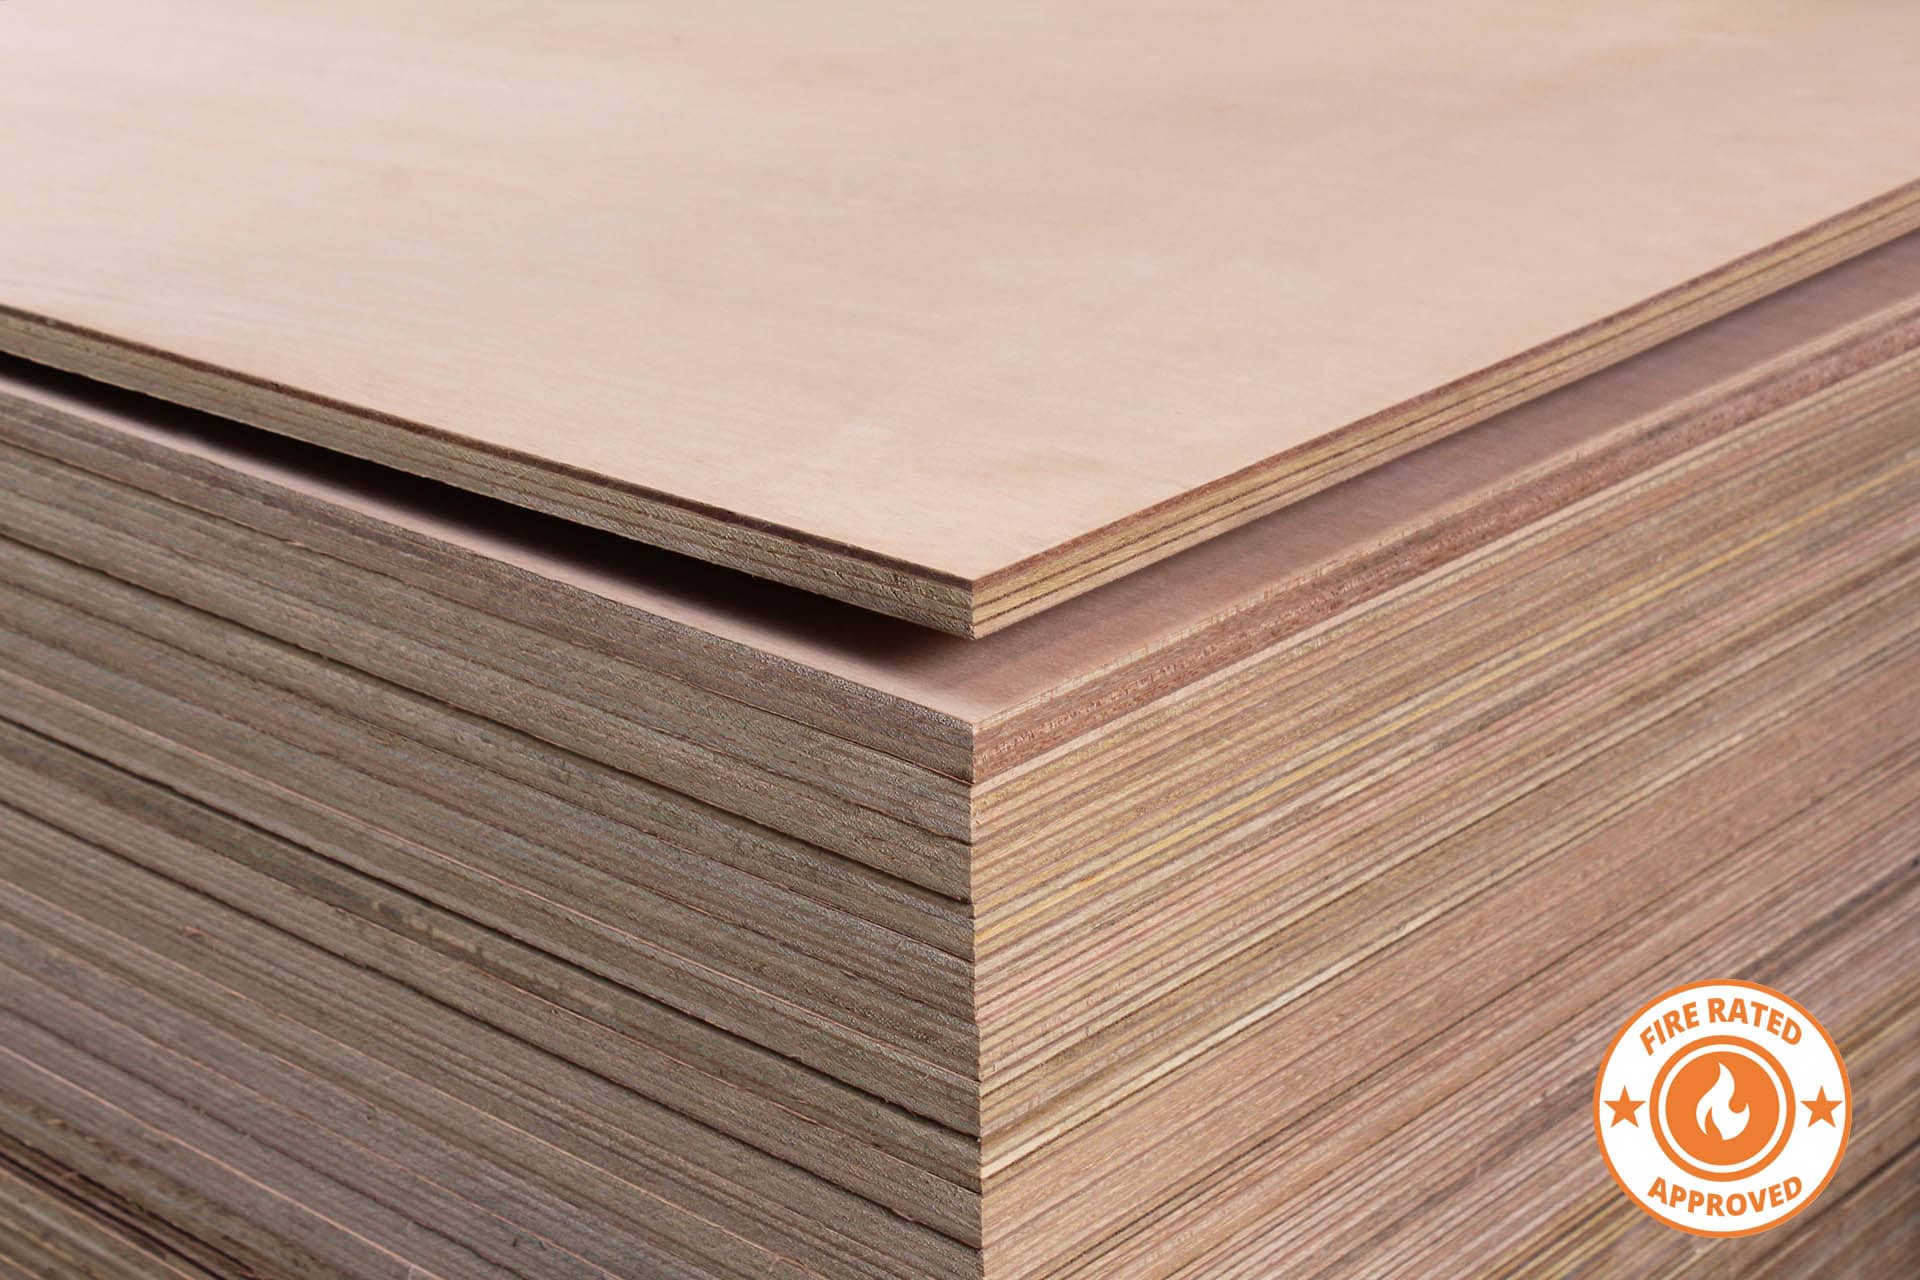 fire-rated-board-plywood-access-panels-protection-kiln-dried-stacked